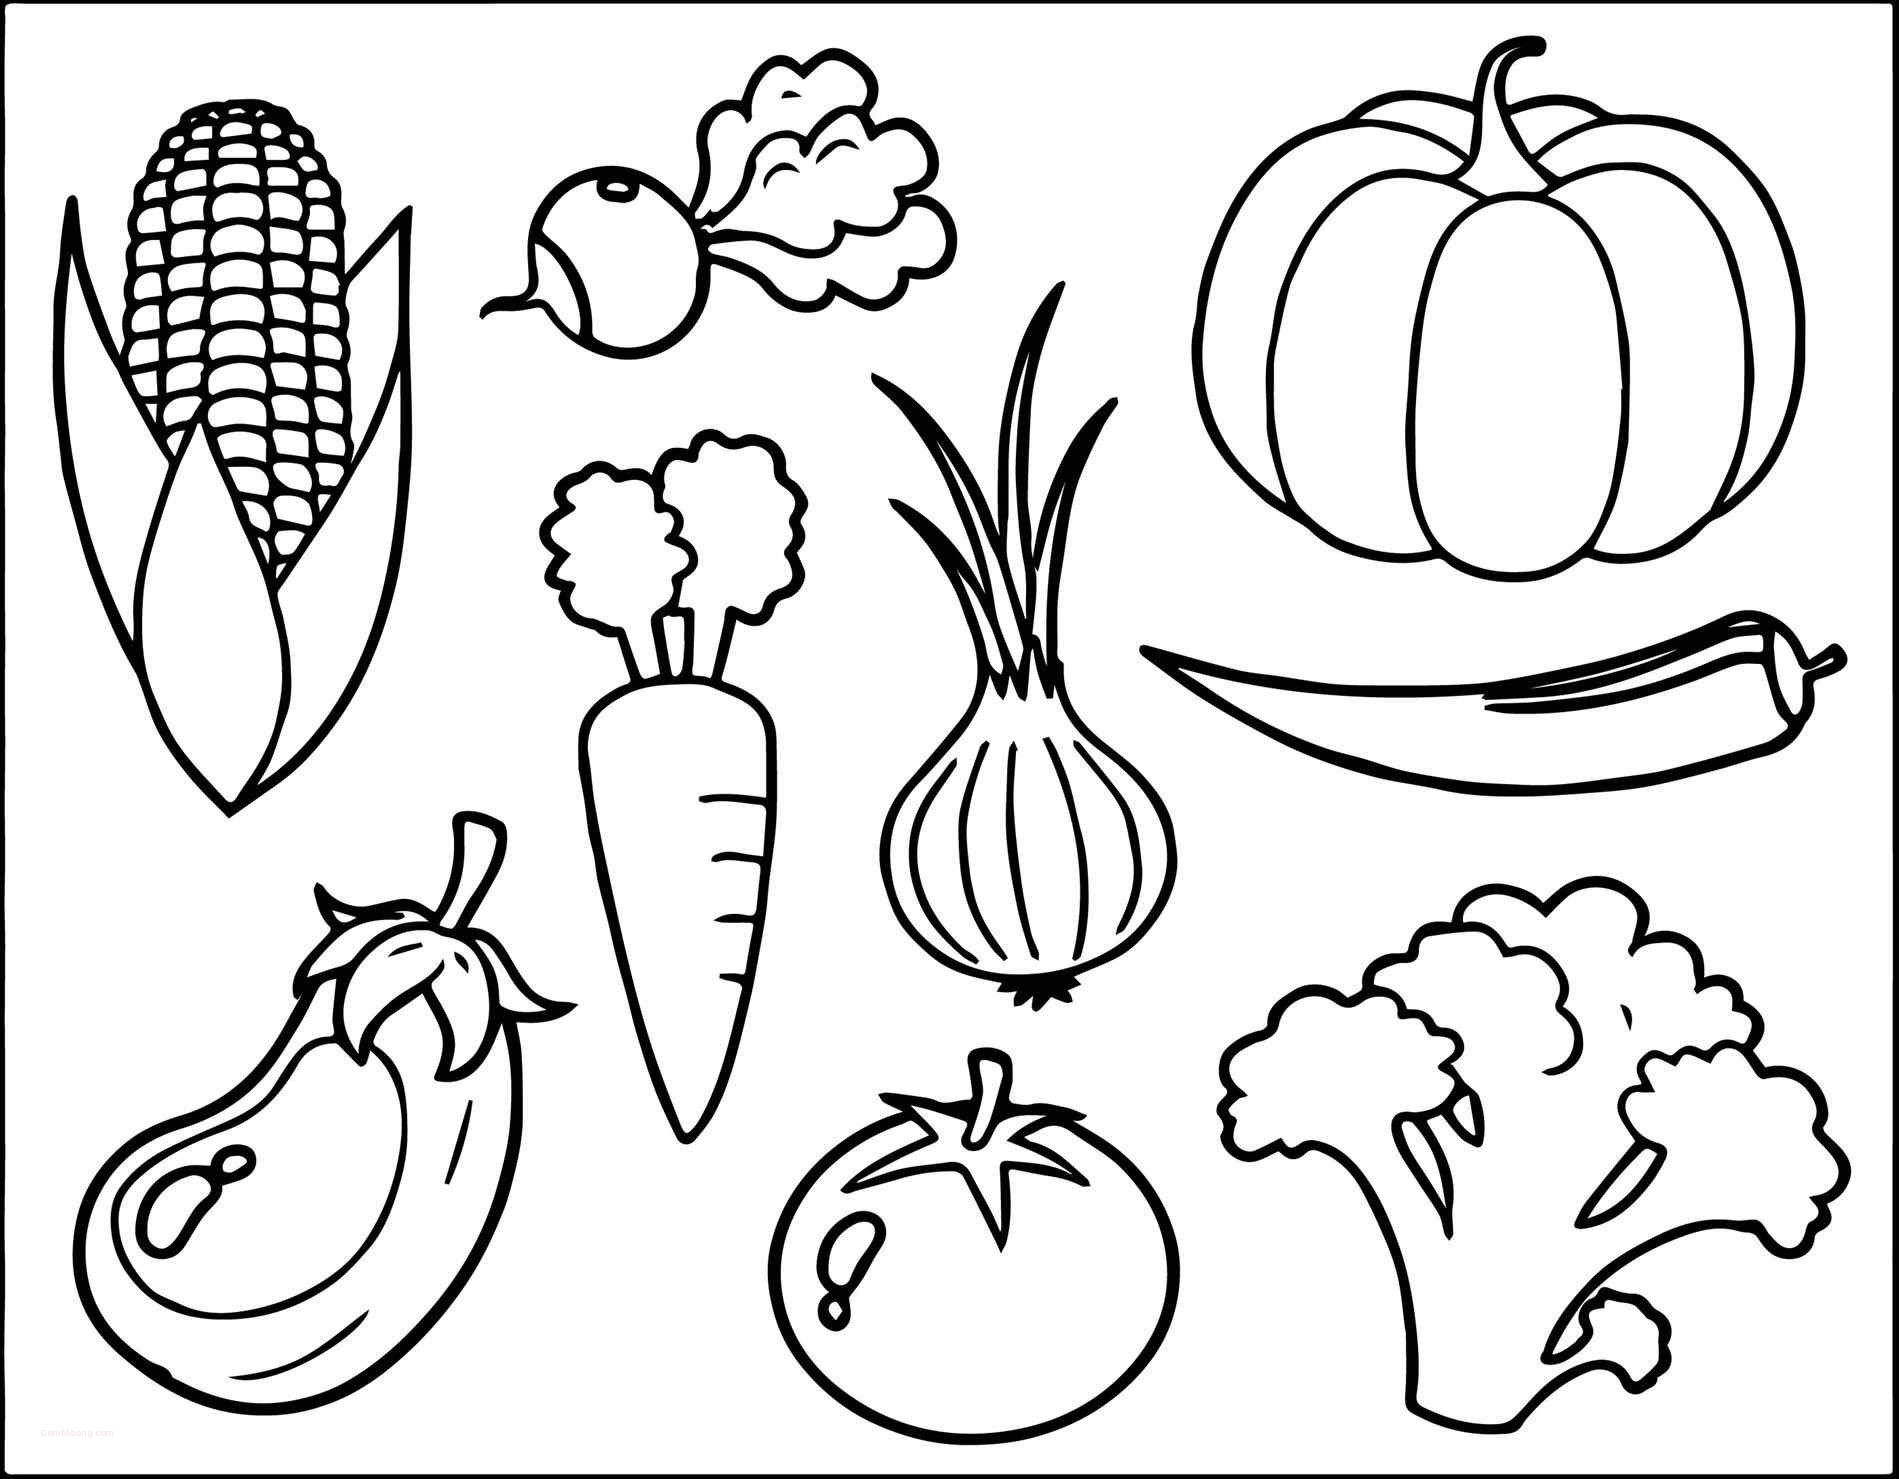 coloring pages : Coloring Book Pictures Of Vegetables Unique Pretty Of  Healthy Food Coloring Pages Coloring Book Pictures Of Vegetables ~ peak